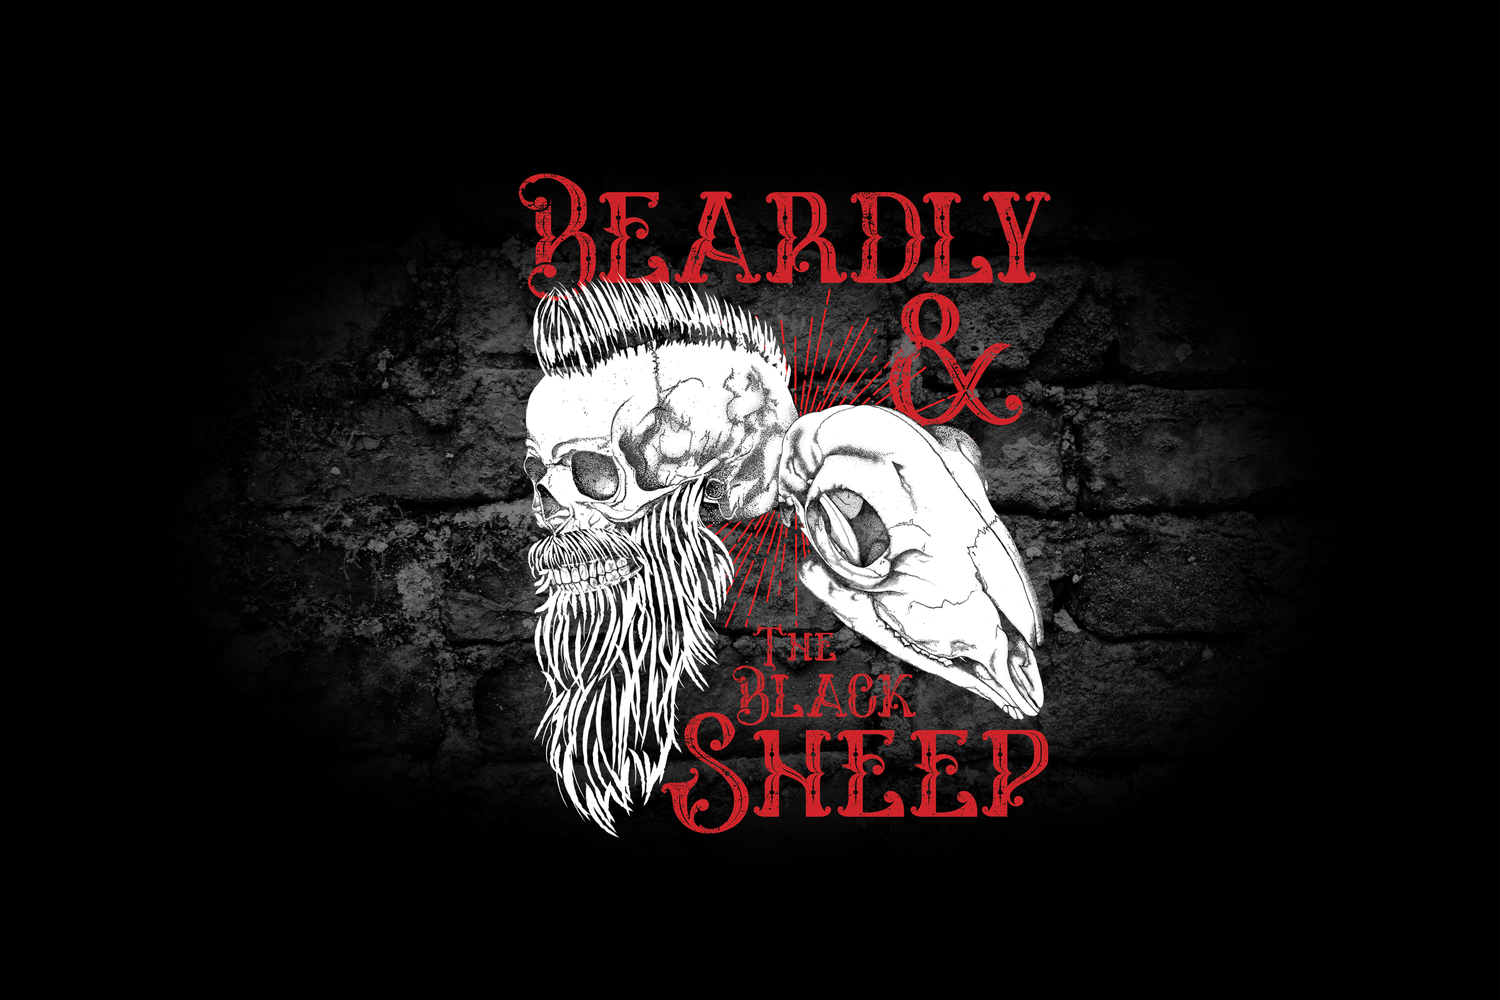 Beardly and the Black Sheep